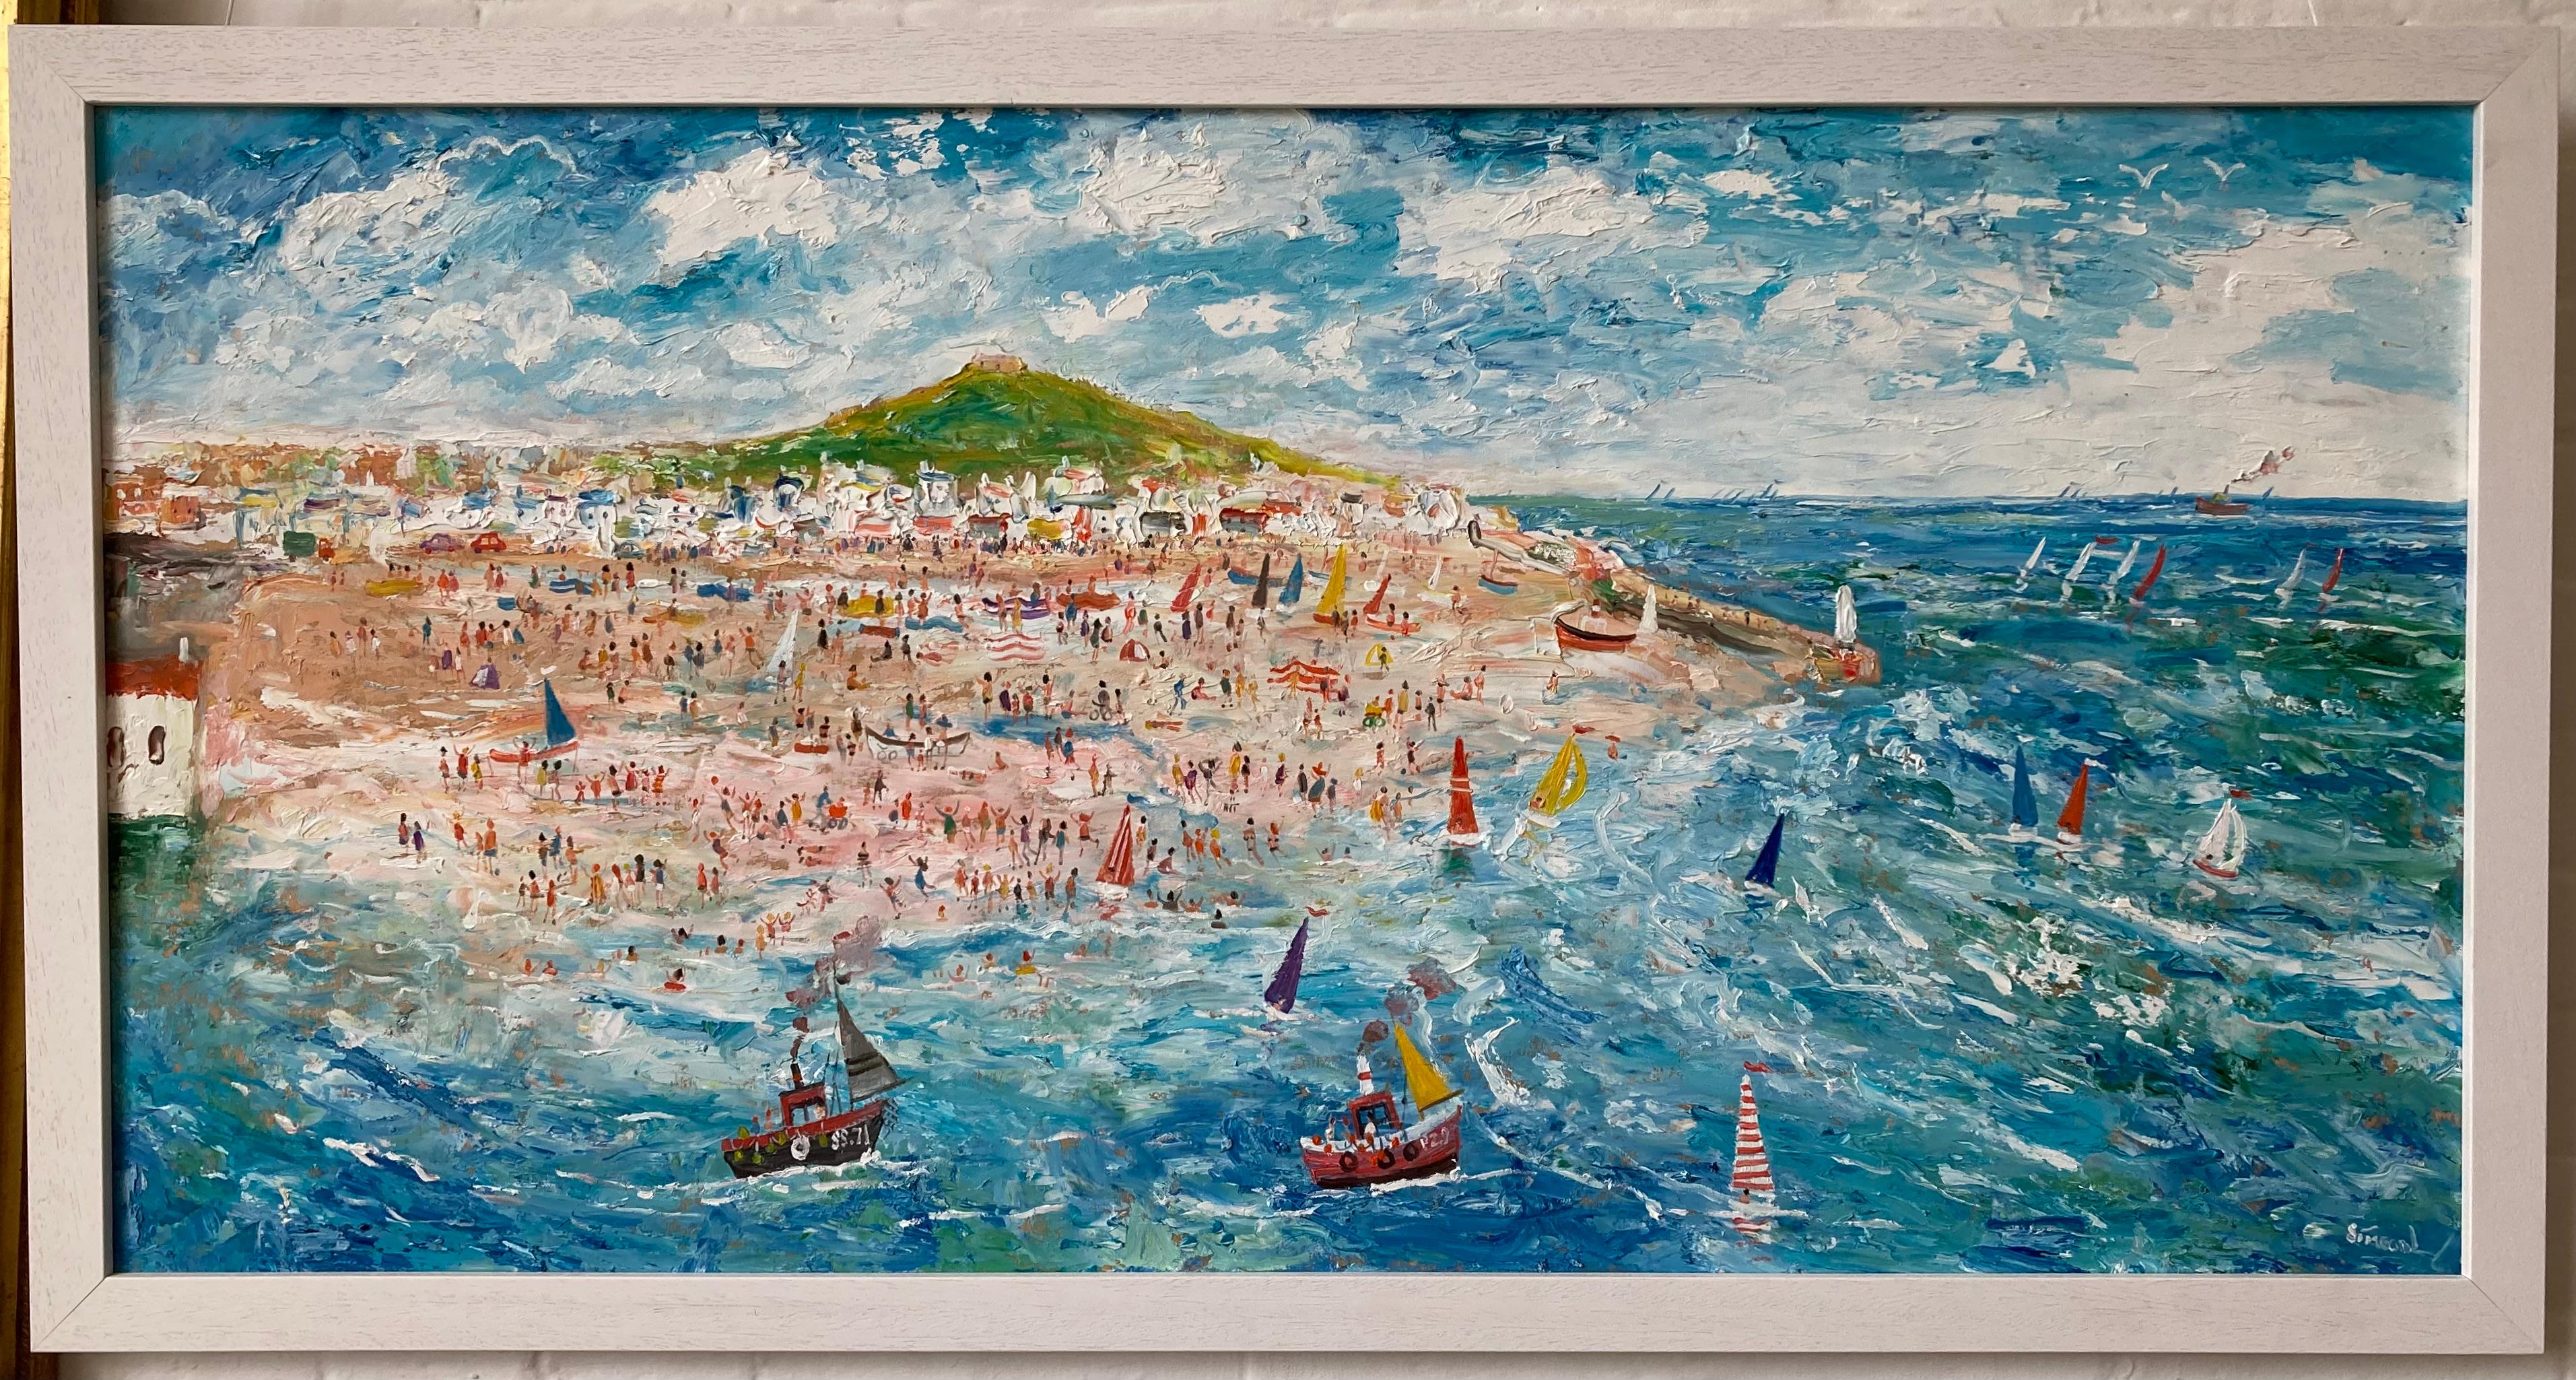 Very Large, Contemporary Modern British, Cornish Naive Outsider Art of St Ives - Painting by Simeon Stafford